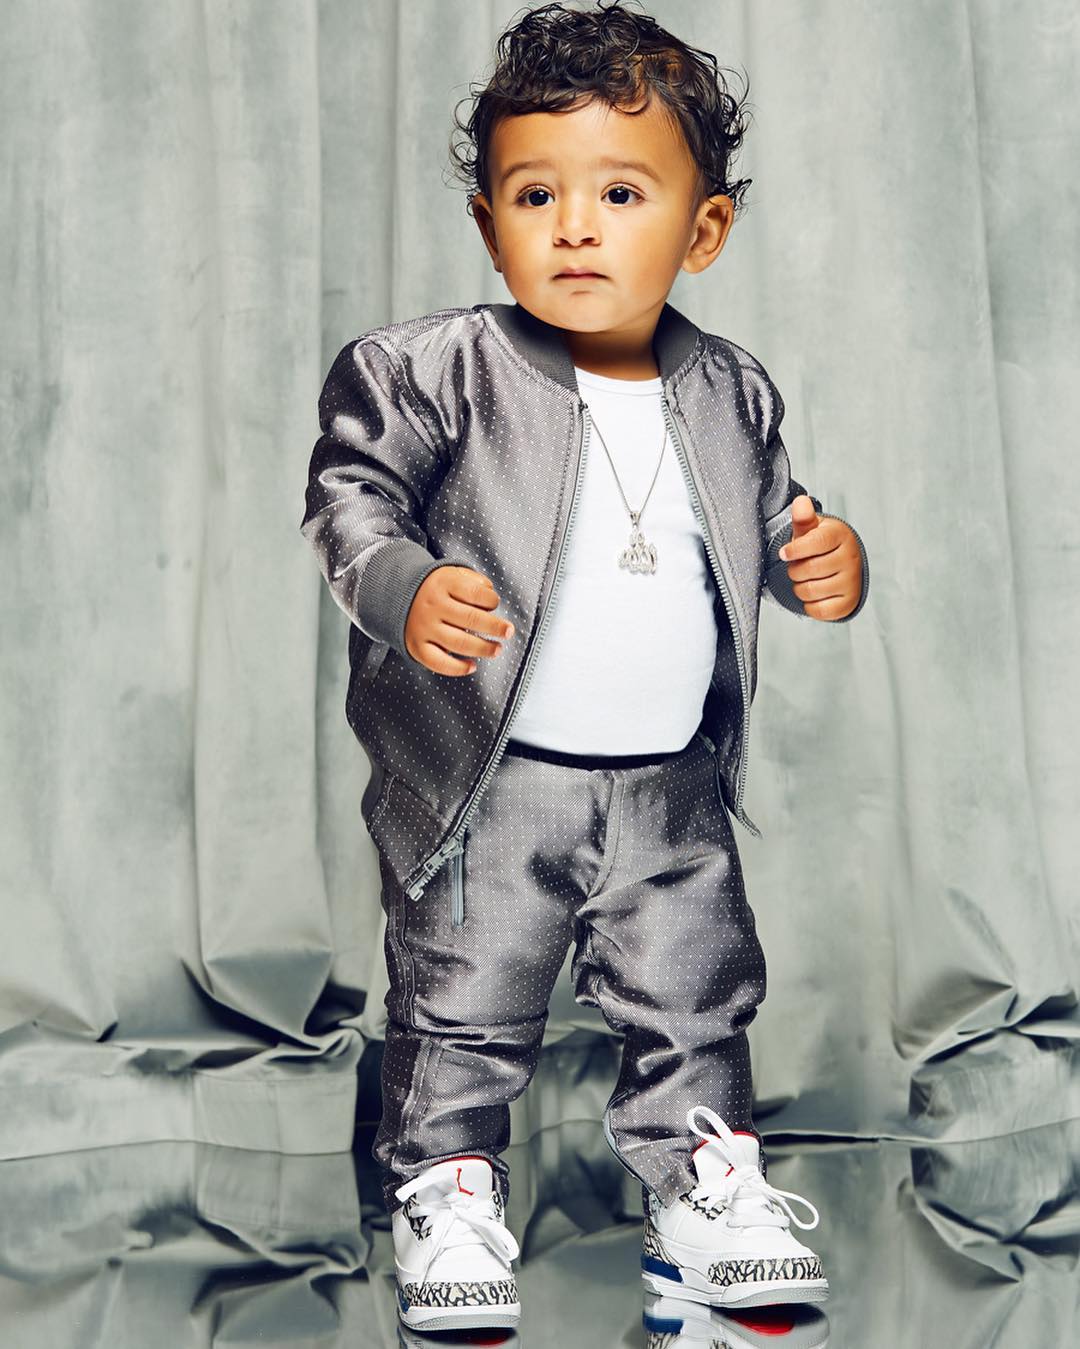 Resemblance between Wizkid's son Zion and DJ Khaled's son Asahd (Photos)